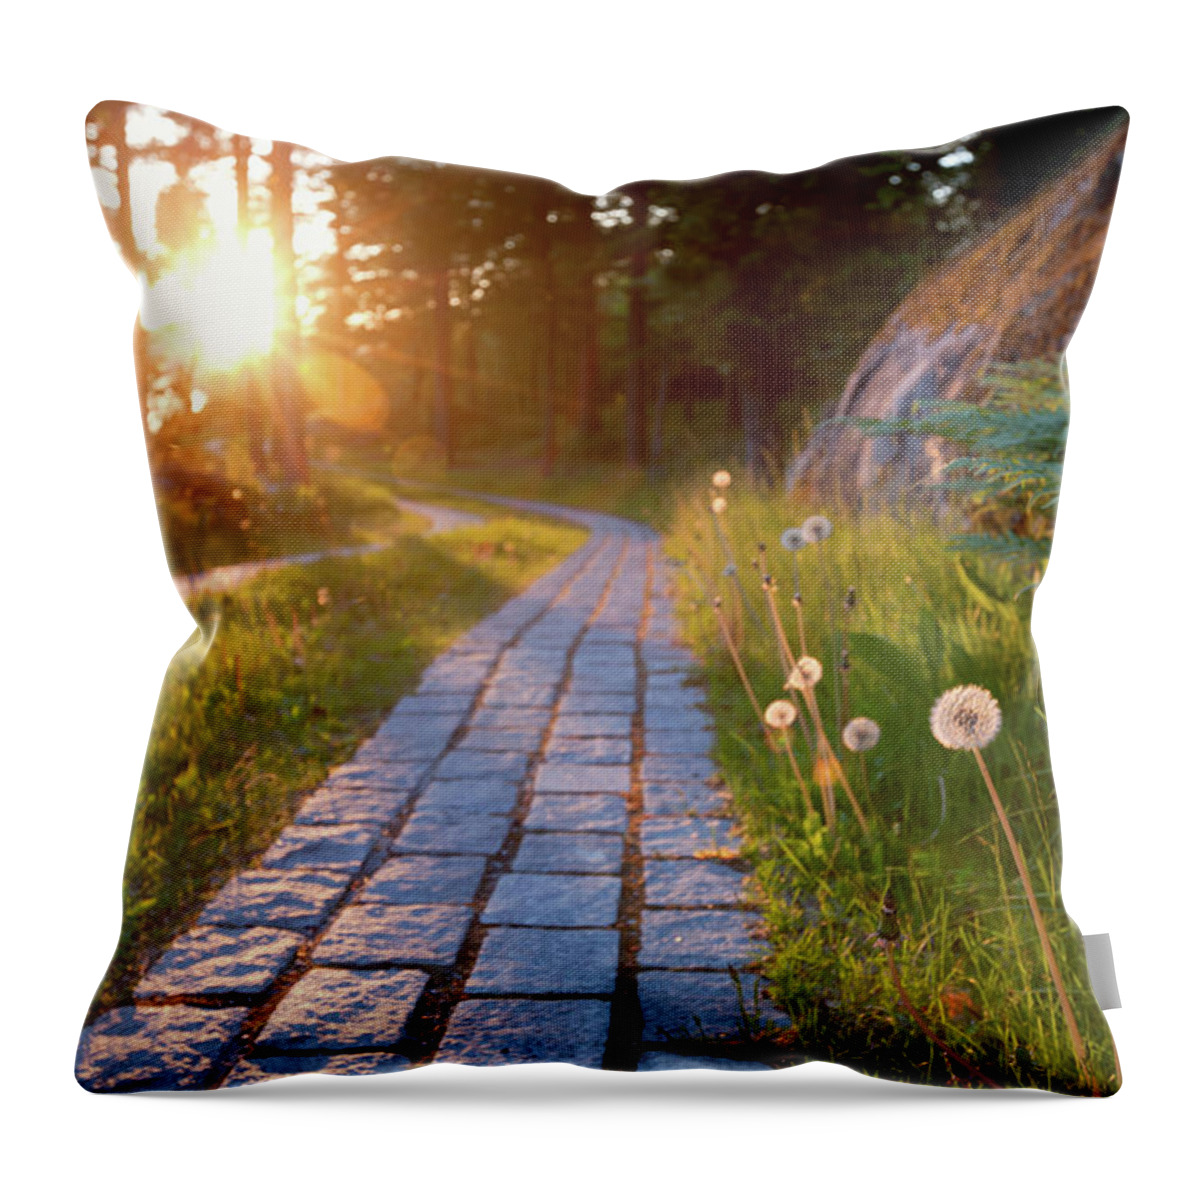 Scenics Throw Pillow featuring the photograph Nature In Sunset by Elin Enger